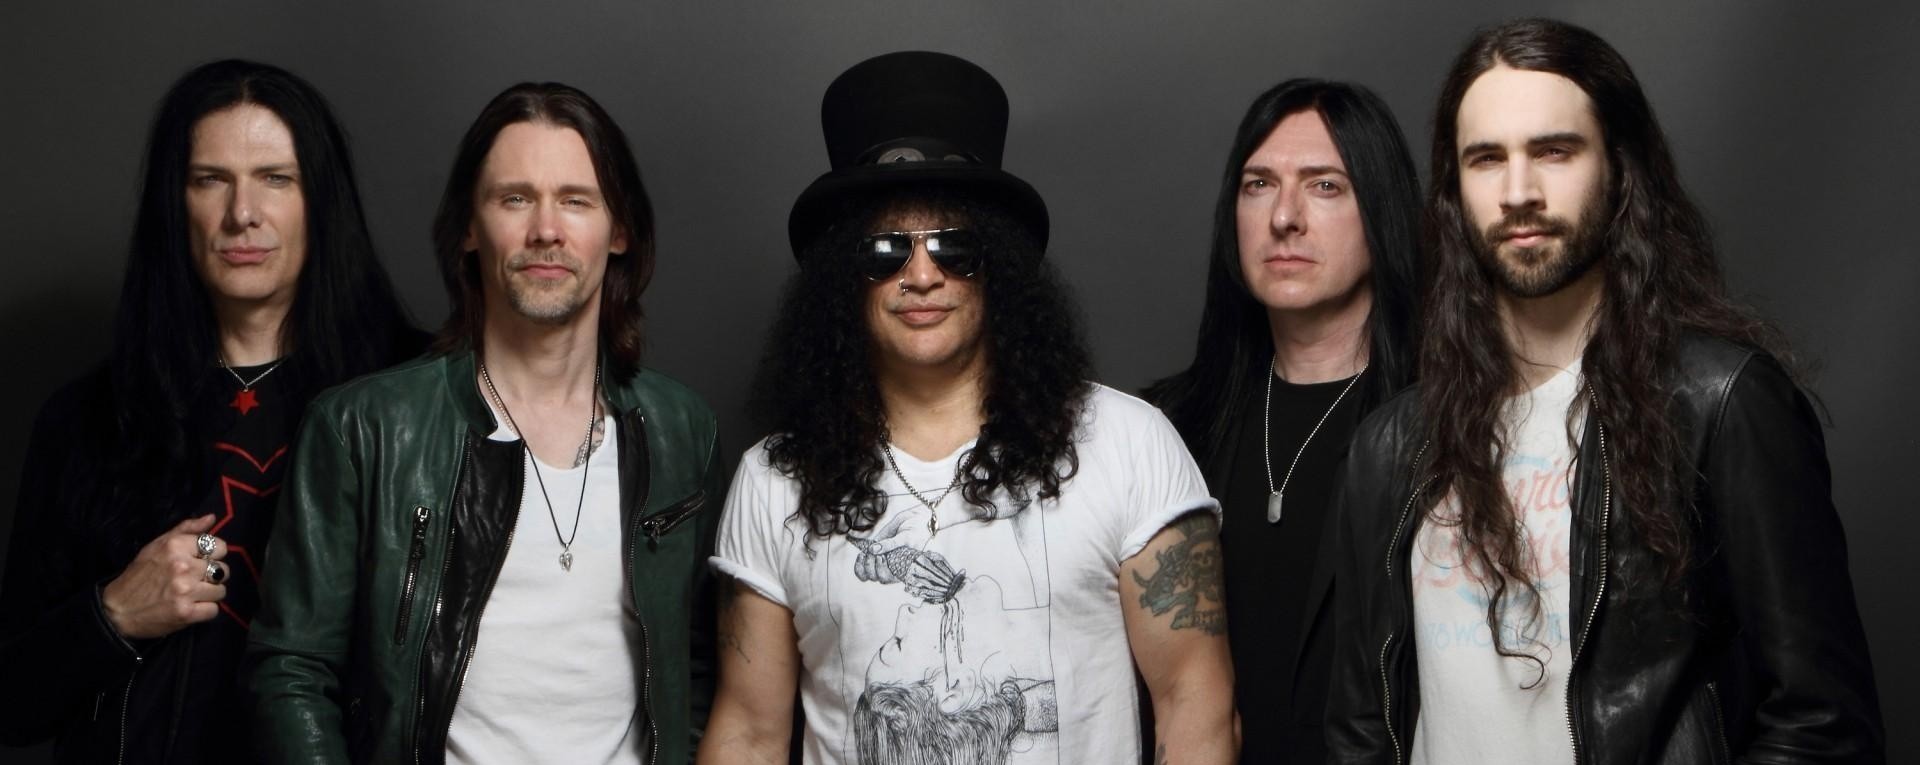 SLASH feat. Myles Kennedy & The Conspirators - Live in Singapore